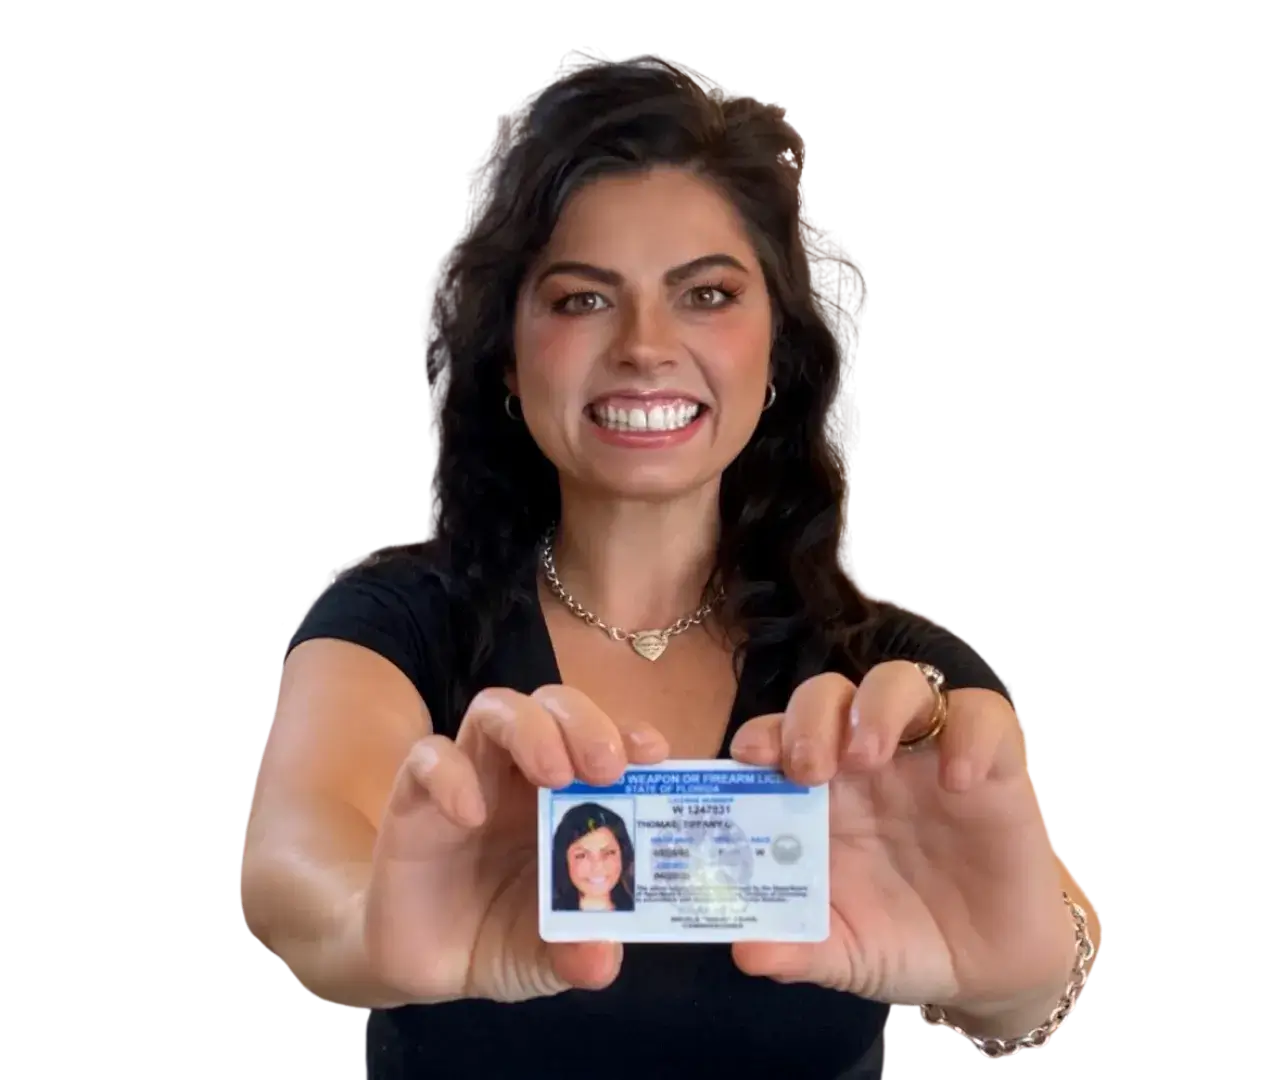 Tffany Thomas Holding Florida Concealed weapons licensee